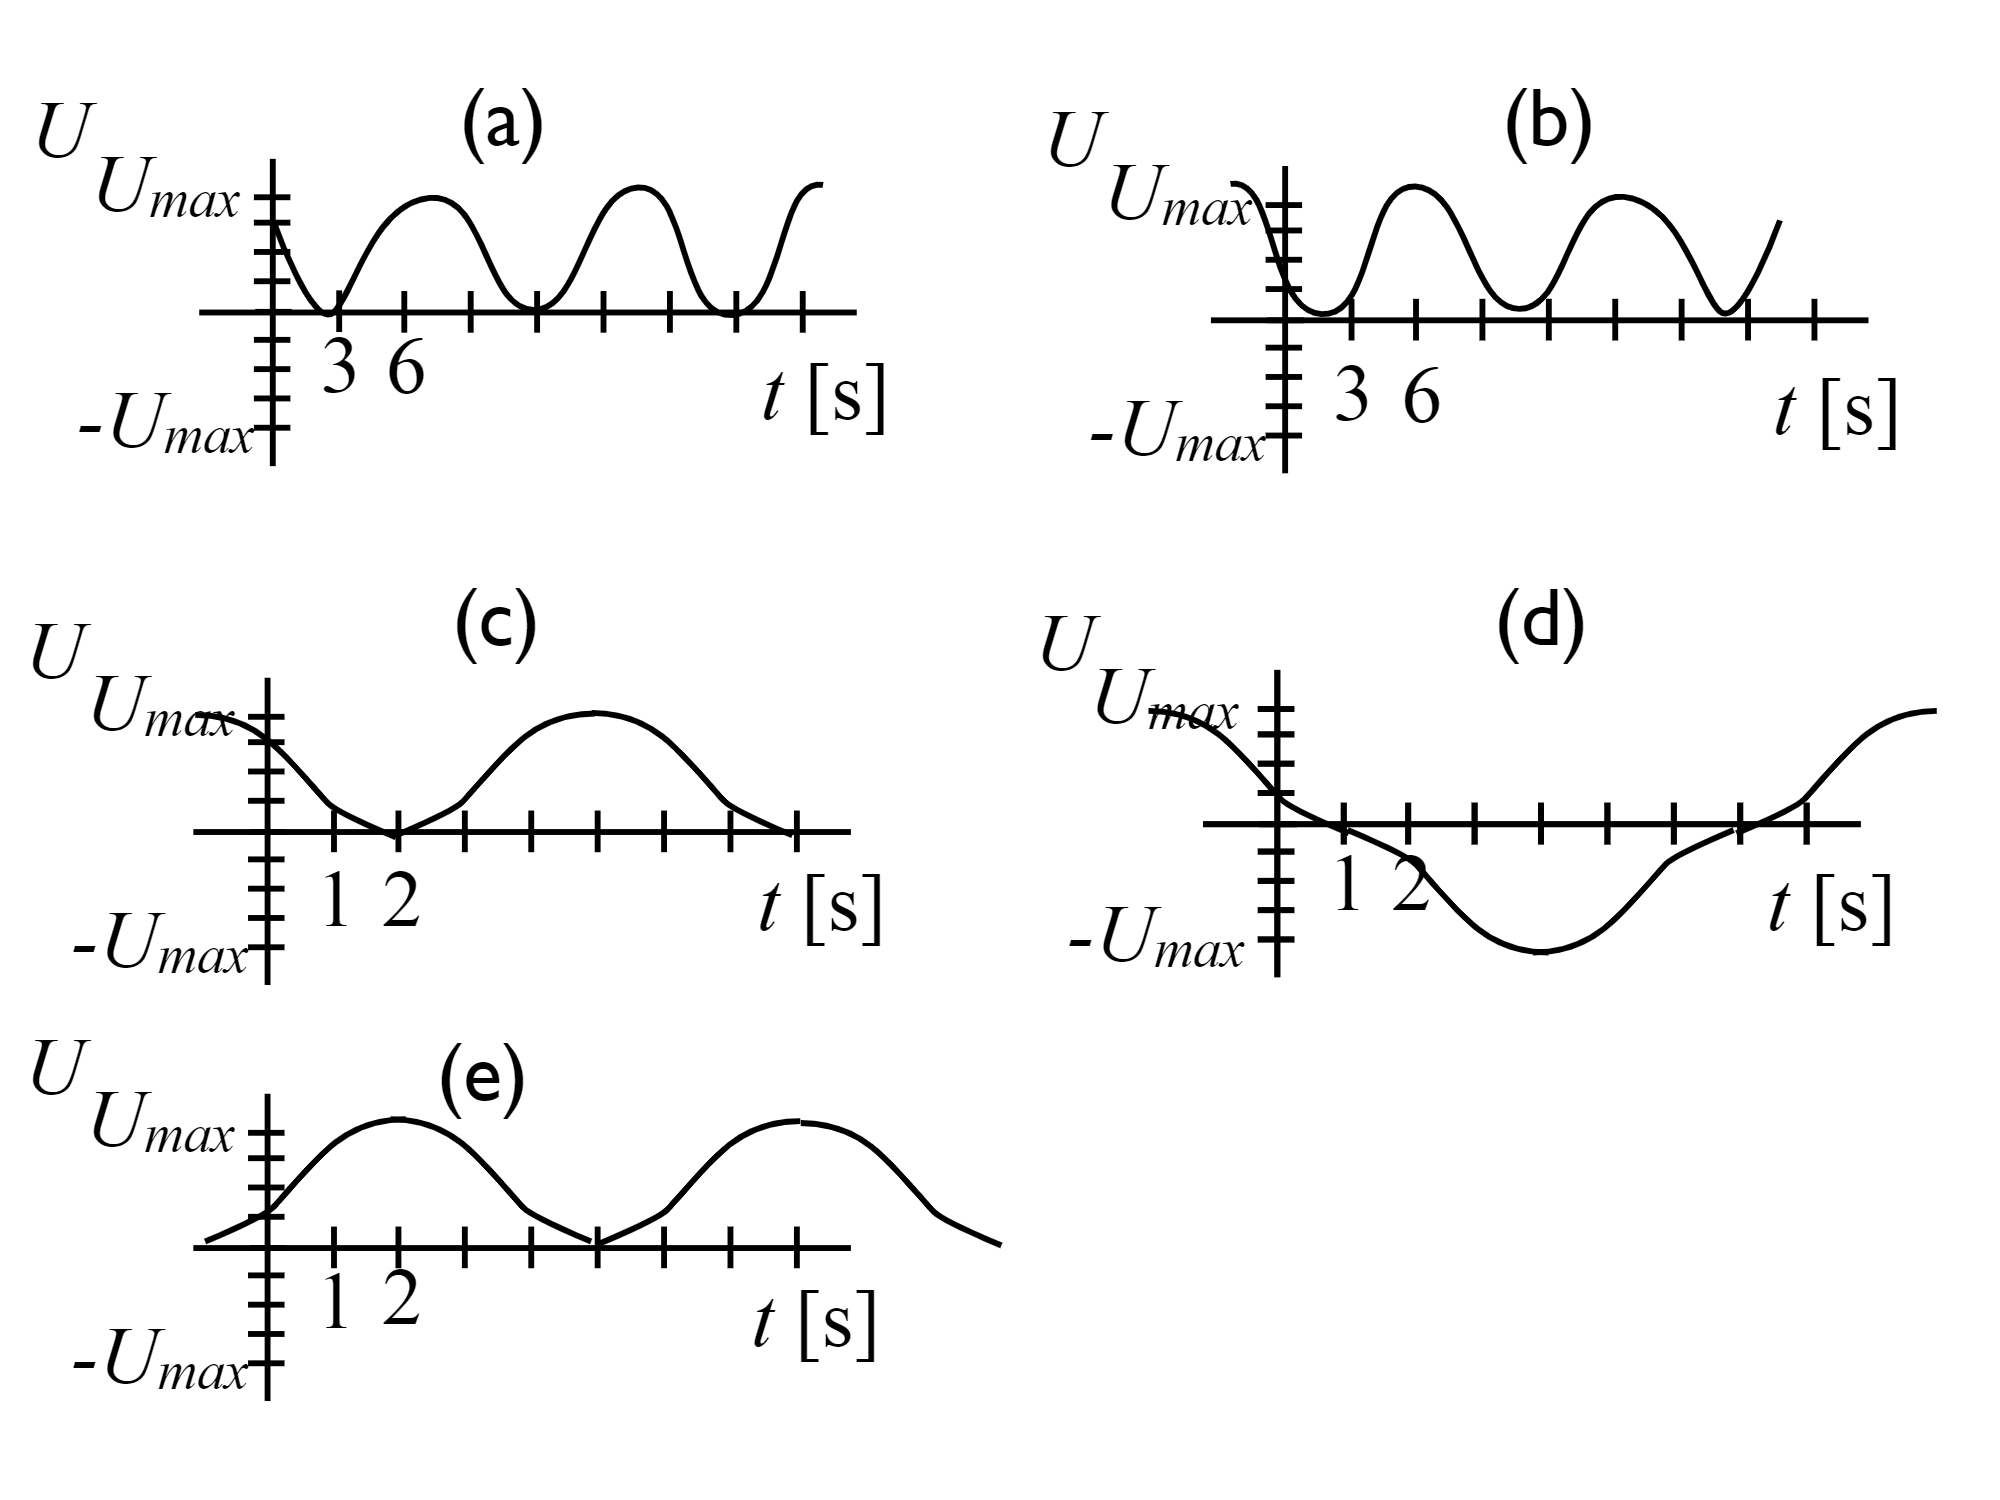 Image of five graphs. The five graphs represent the elastic potential energy as a function of time for a simple harmonic oscillator. Graph A shows positive elastic potential energy at all times with U at its minimum at t = 3s. Graph B shows positive elastic potential energy at all times with U at its minimum at t = 1.5s. Graph C shows positive elastic potential energy at all times with U at its minimum at t = 2s. Graph D shows negative elastic potential energy at 1s < t < 7s with U at its minimum at t = 4s. Graph E shows positive elastic potential energy at all times with U at its maximum at t = 2s.